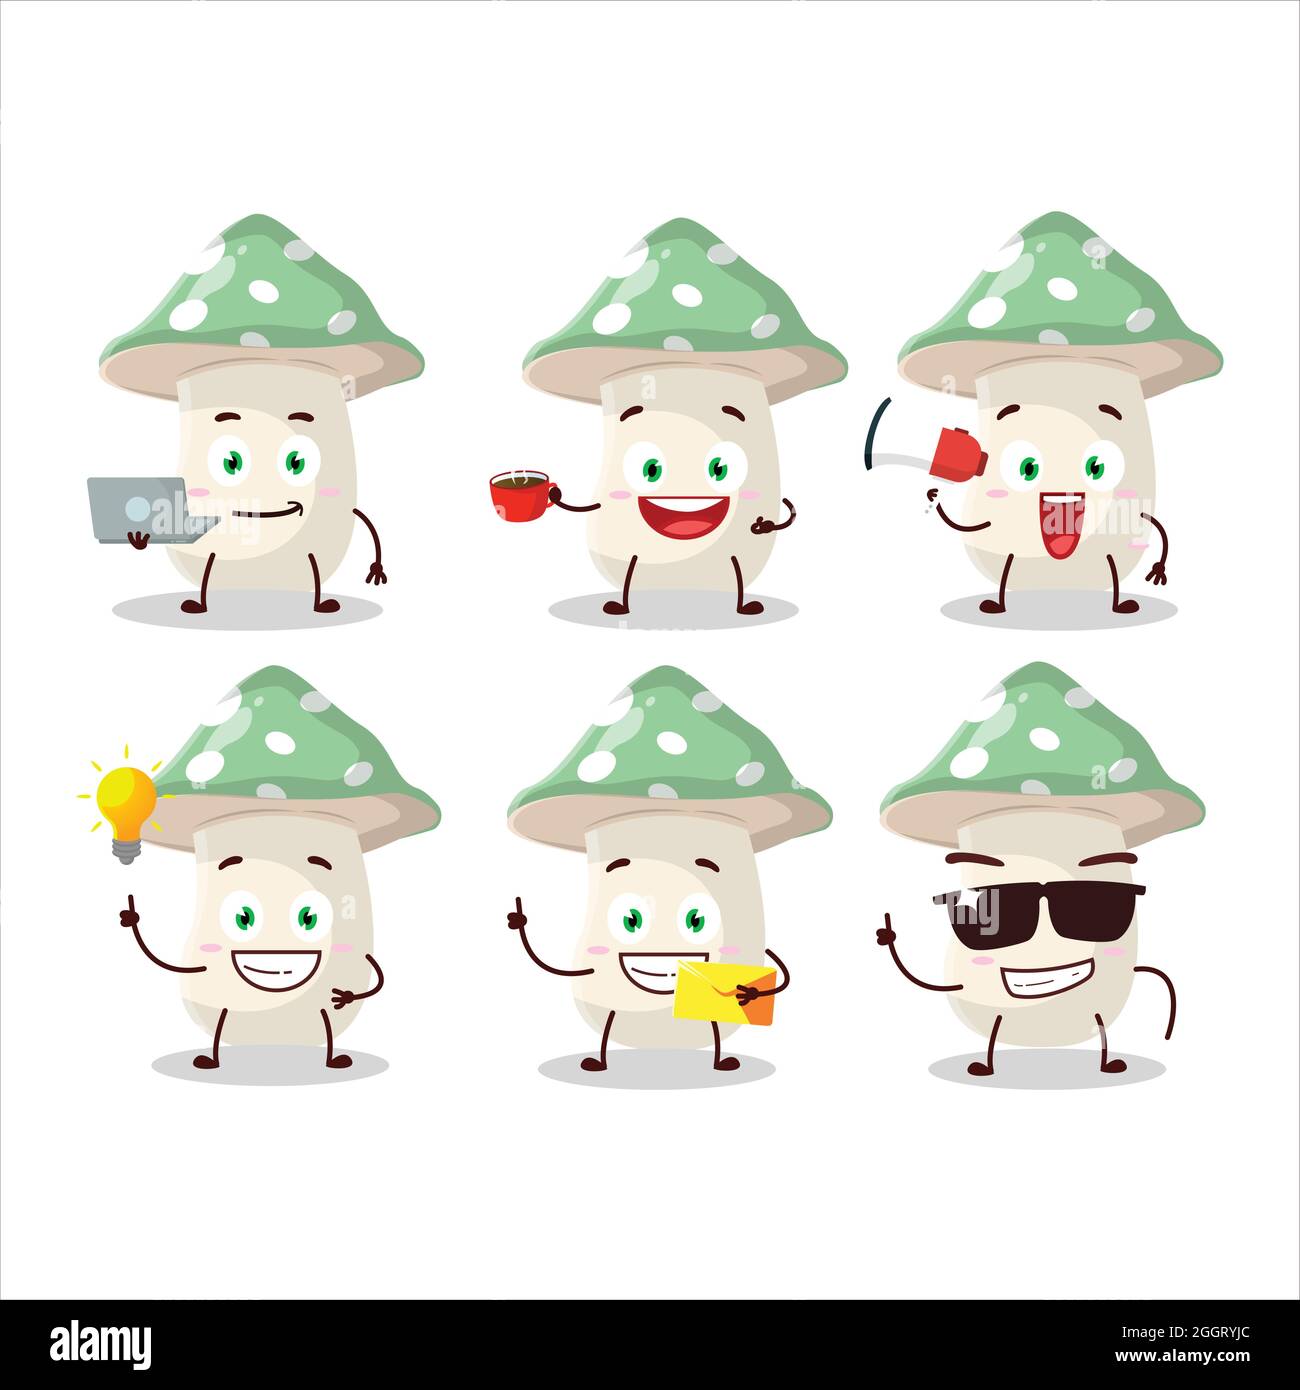 Green amanita cartoon character with various types of business emoticons. Vector illustration Stock Vector